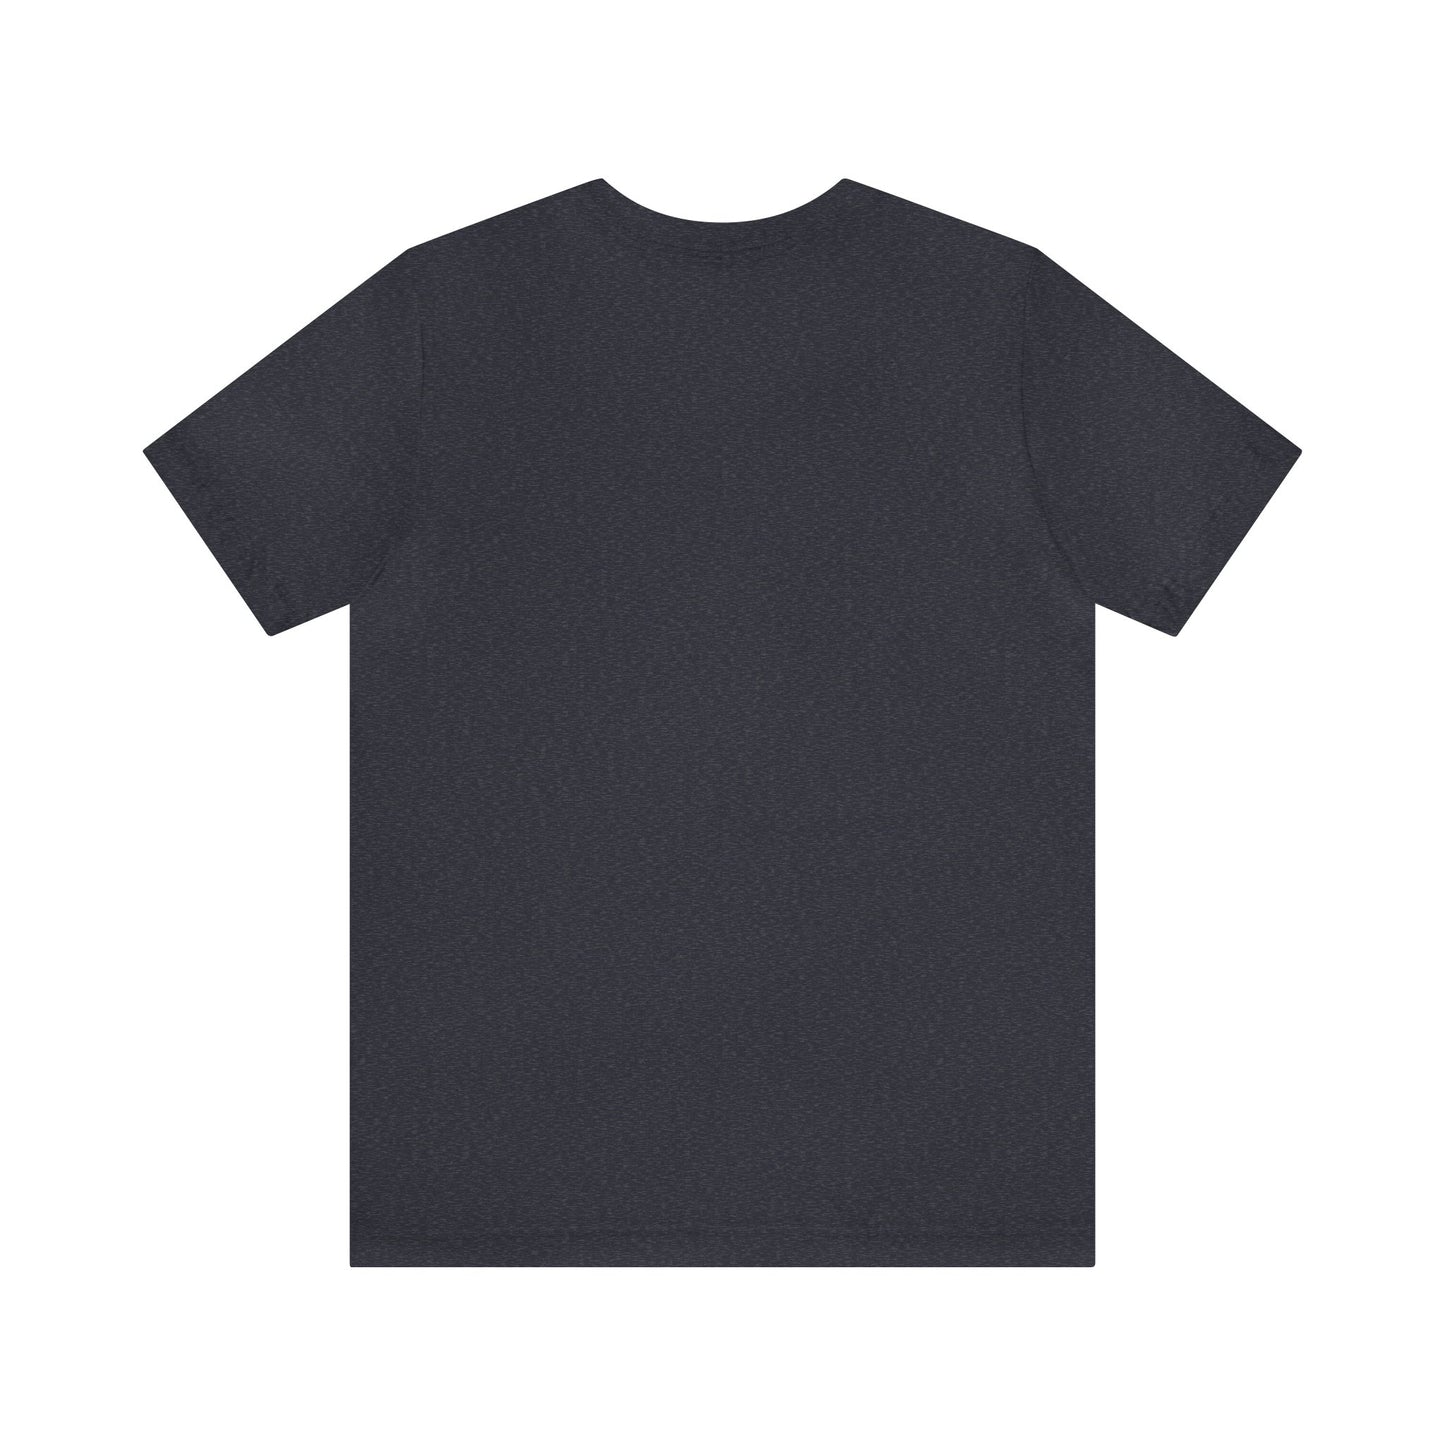 P&F Unisex Jersey Loose Fit Tee